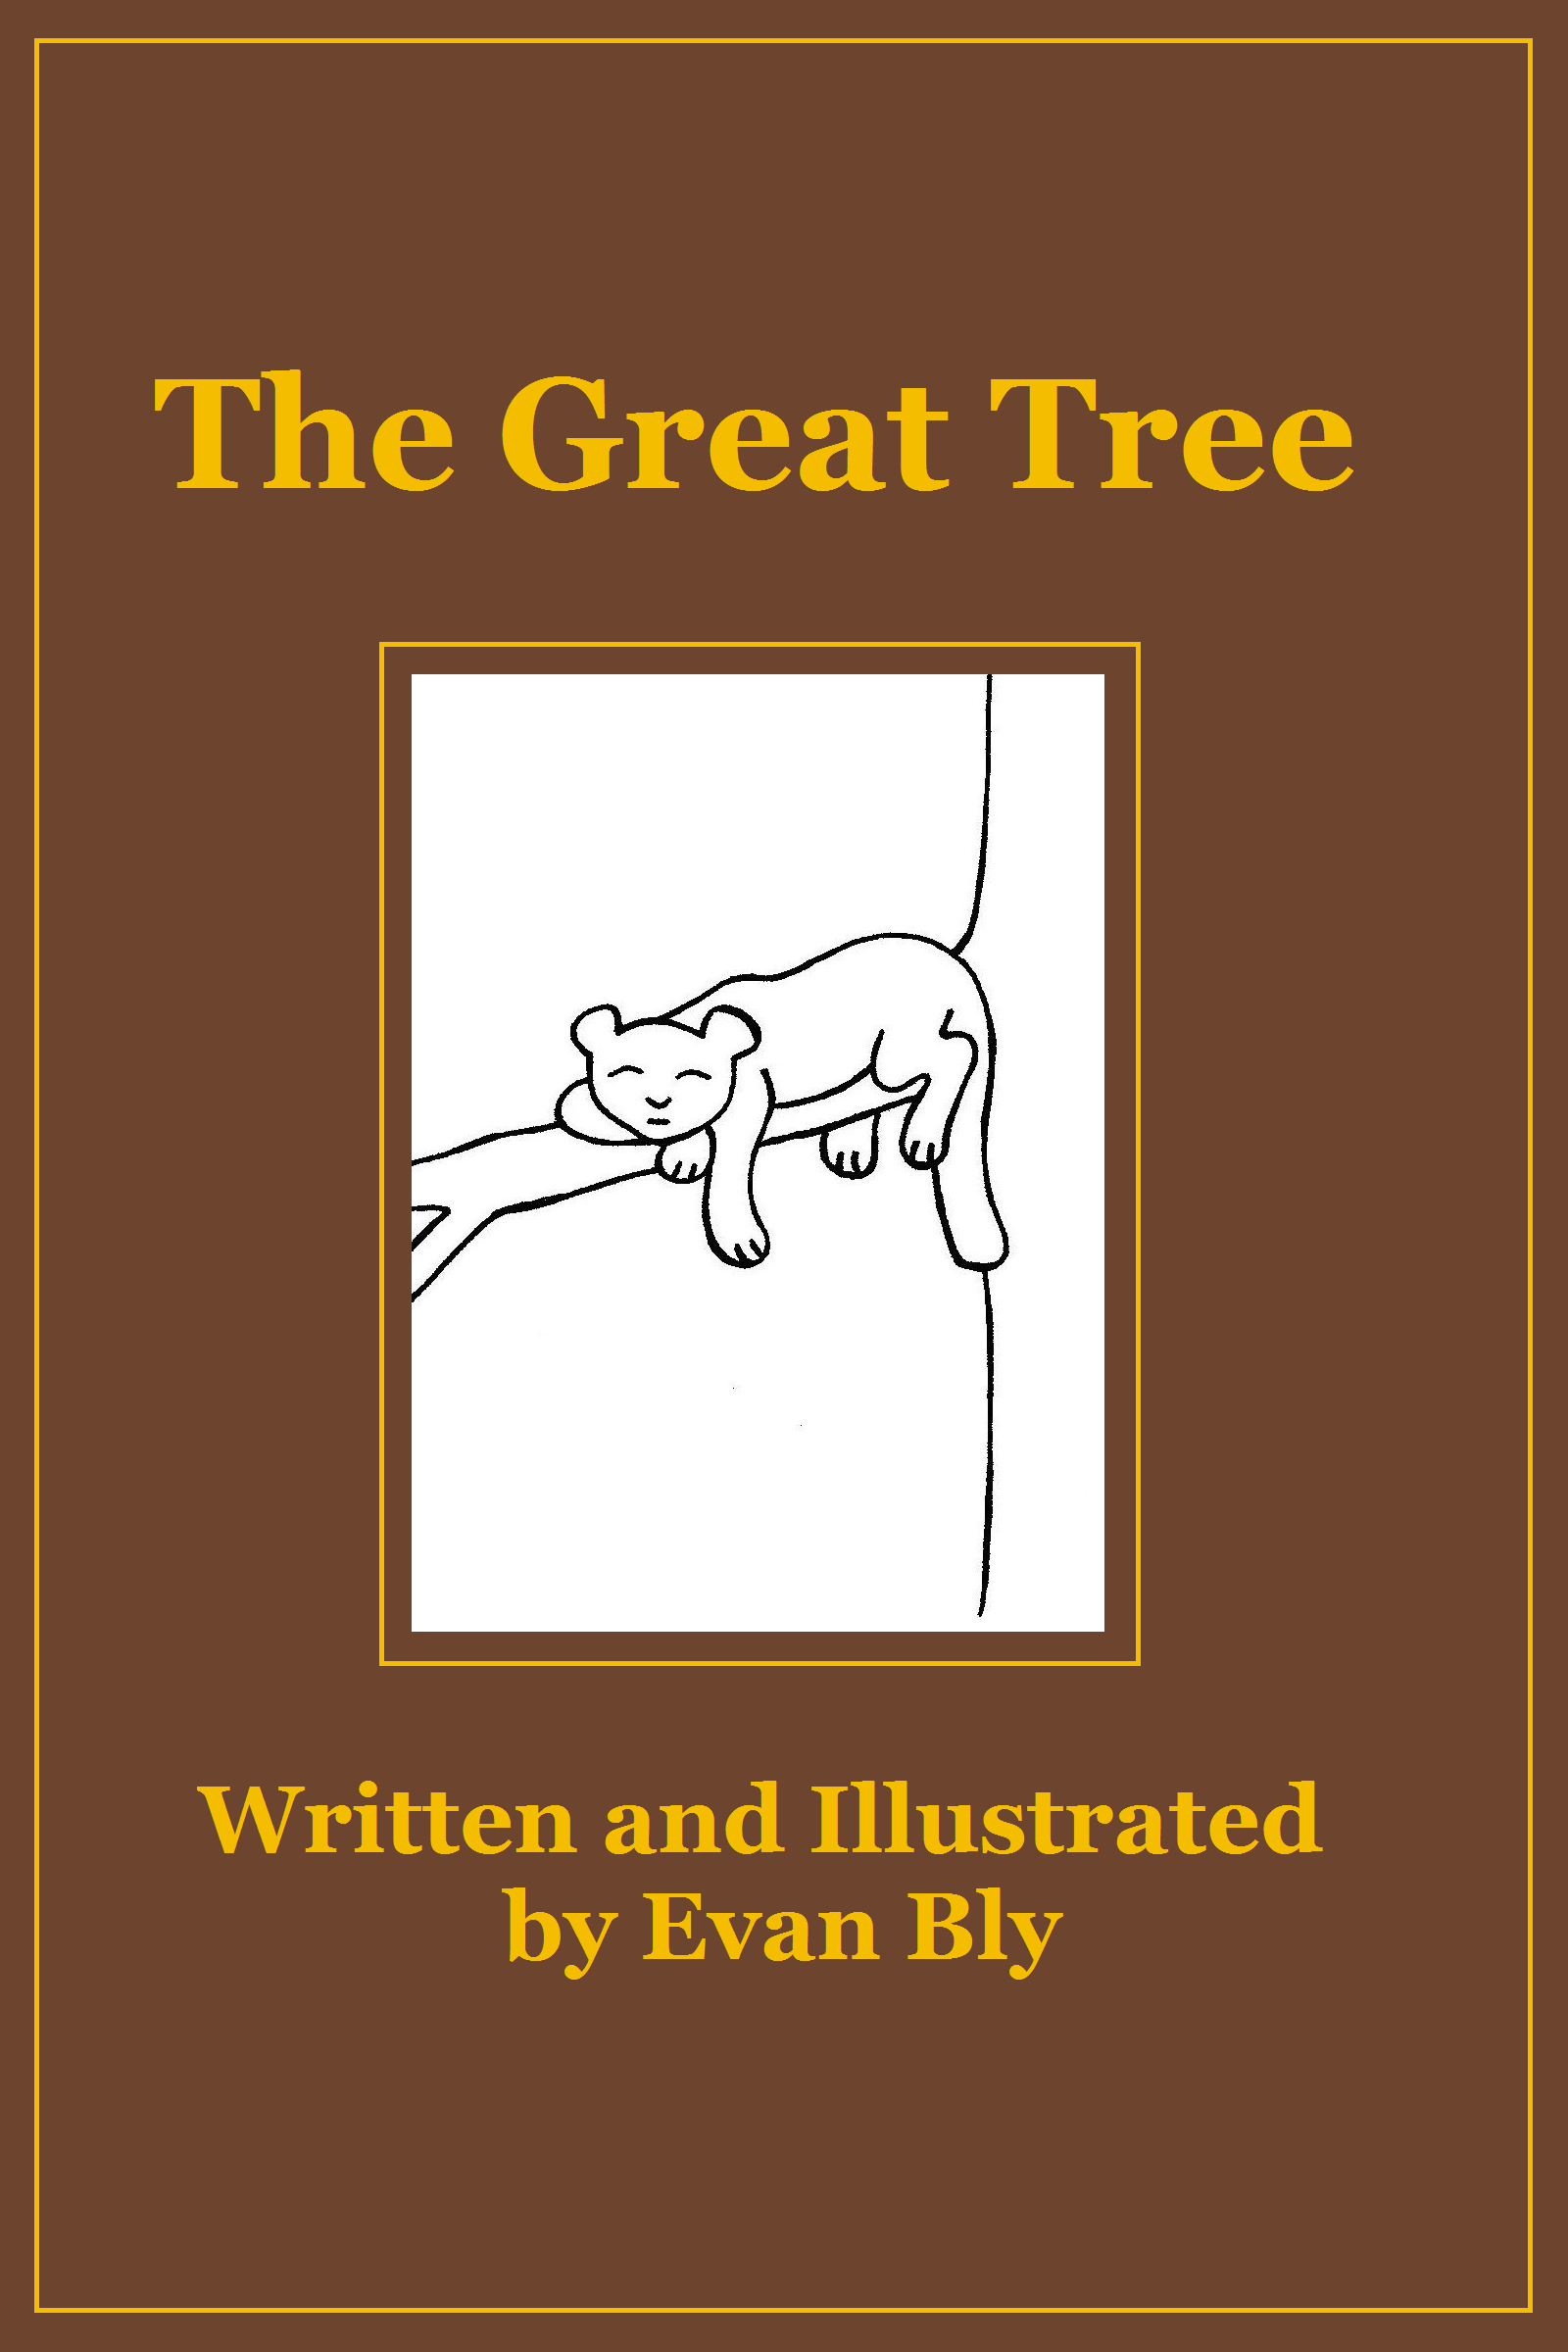 The Great Tree - an illustrated children's book